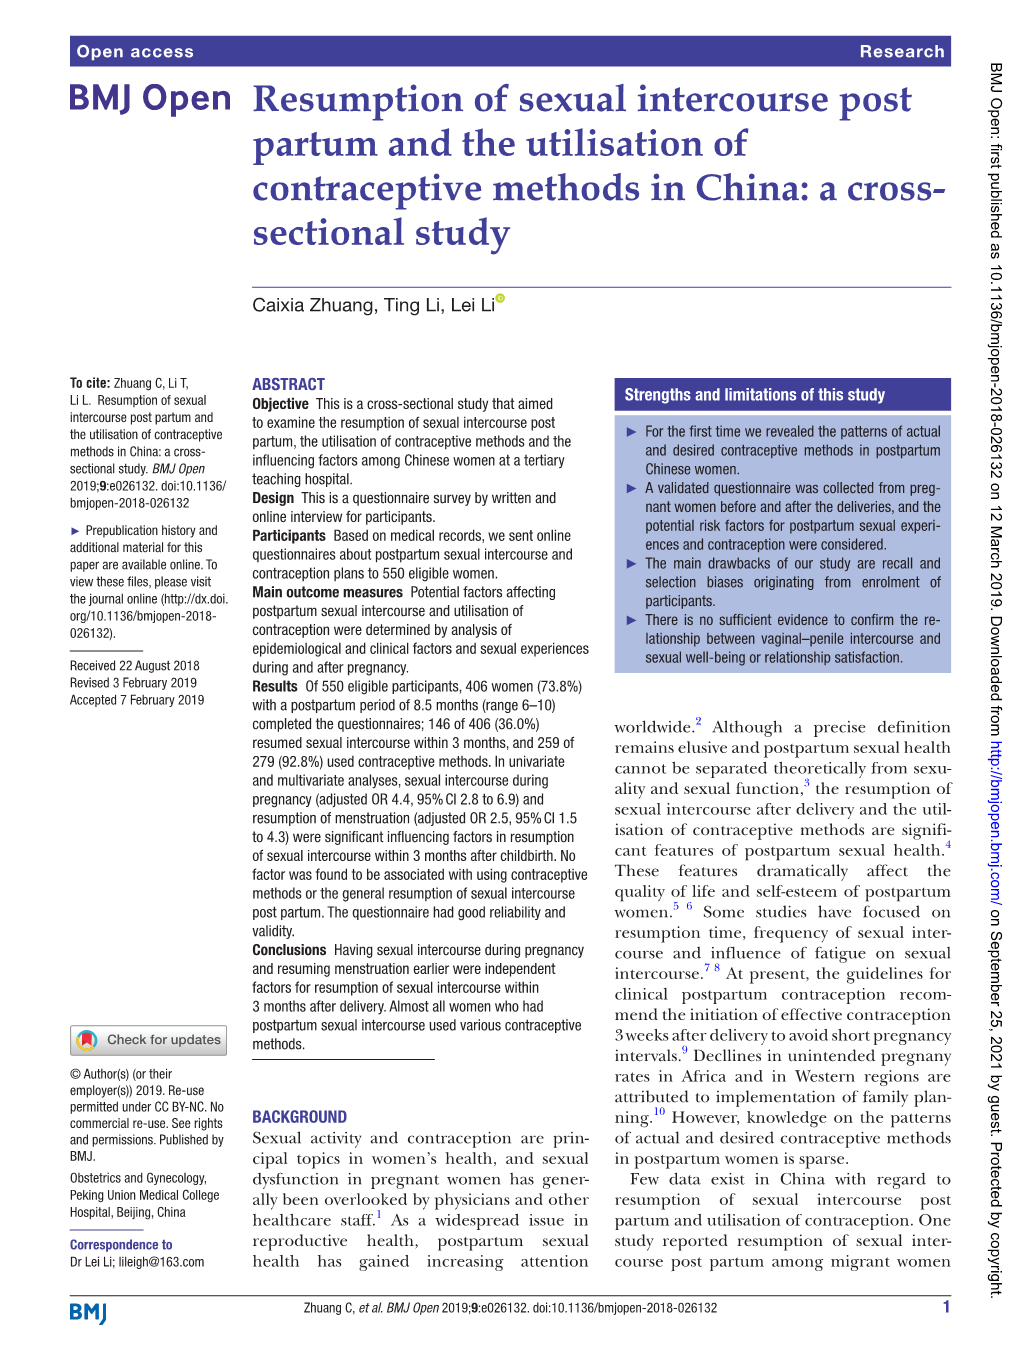 Resumption of Sexual Intercourse Post Partum and the Utilisation of Contraceptive Methods in China: a Cross- Sectional Study